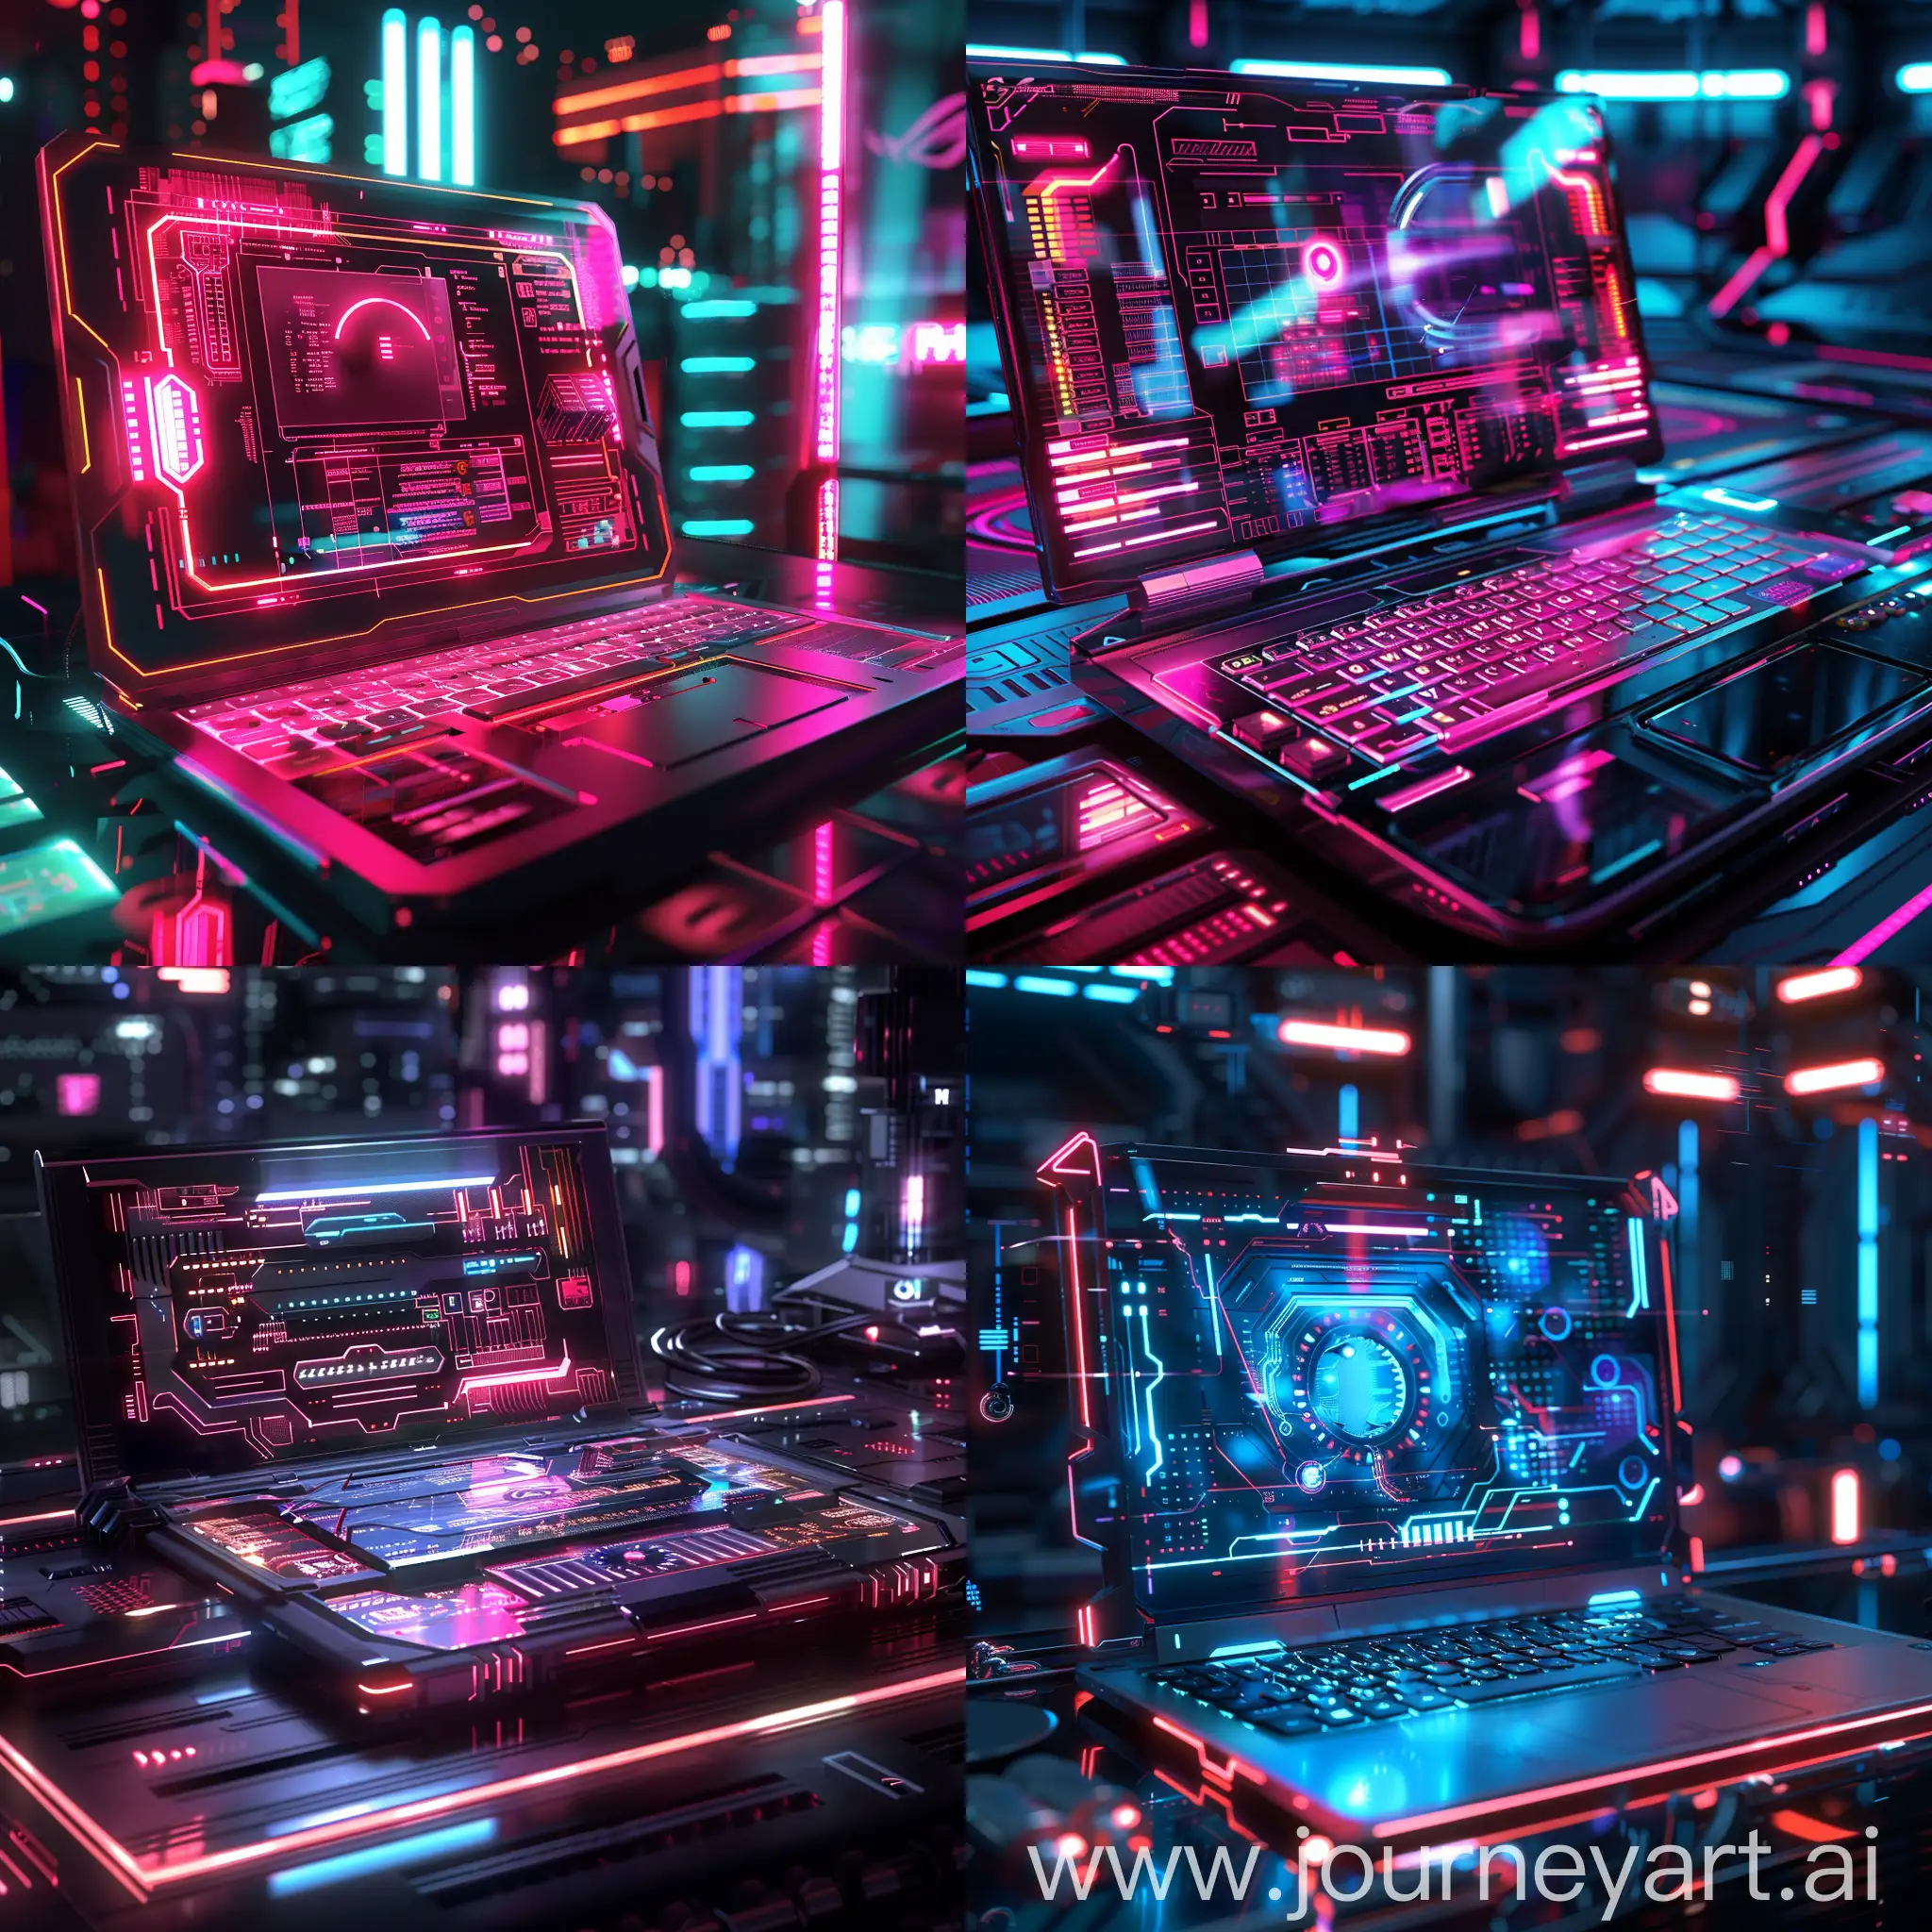 Futuristic-Laptop-with-Holographic-Interfaces-in-Neonlit-Setting